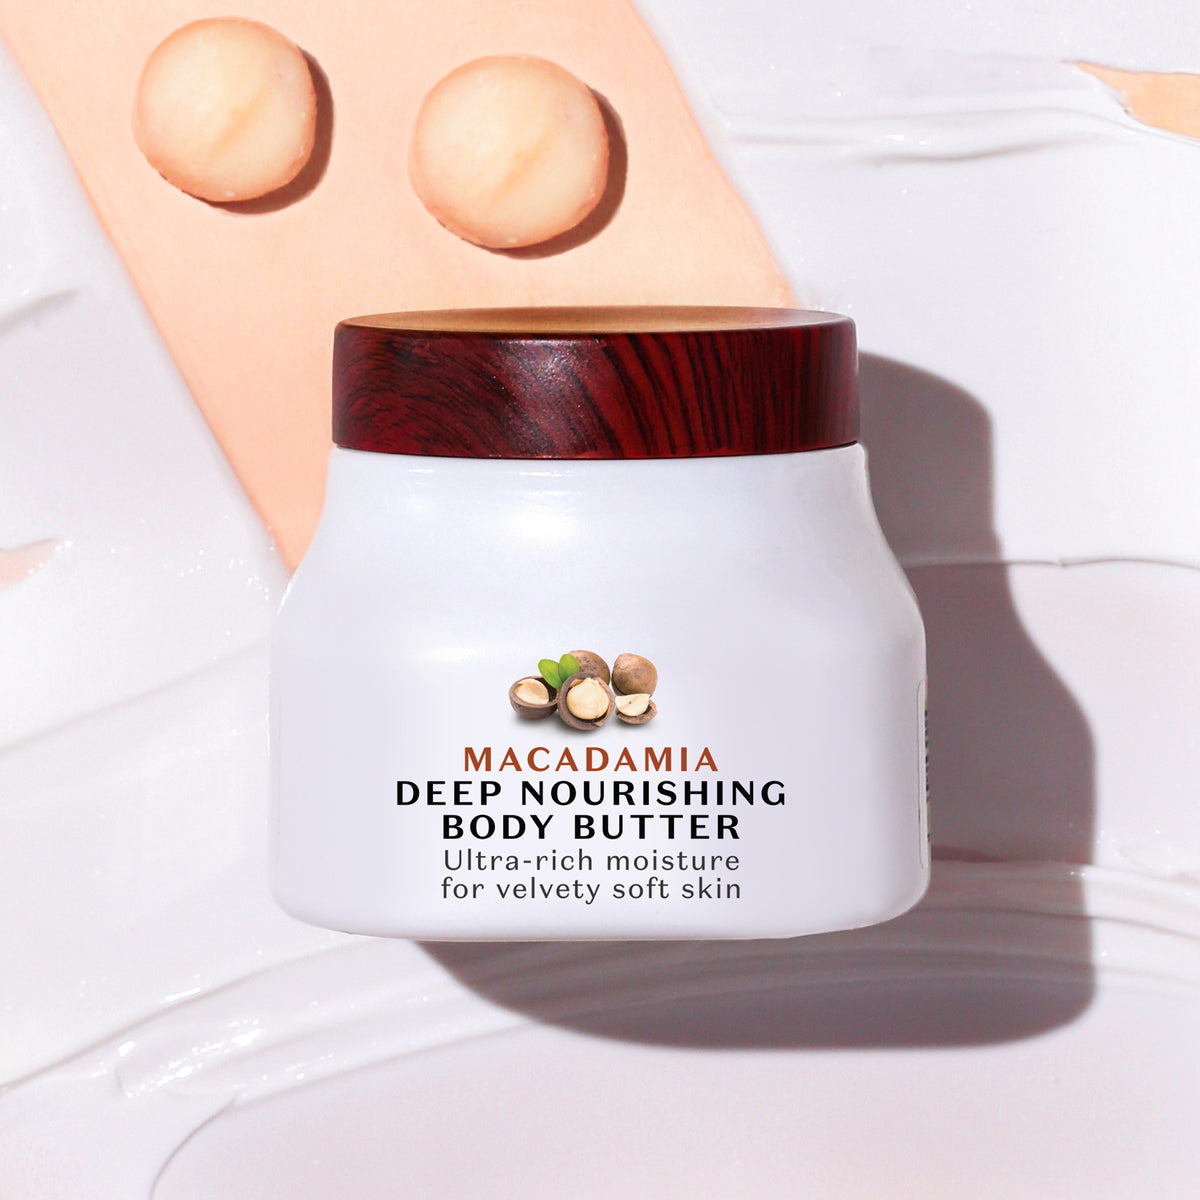 Macadamia Deep Nourishing Body Butter | From the makers of Parachute Advansed | 140 ml